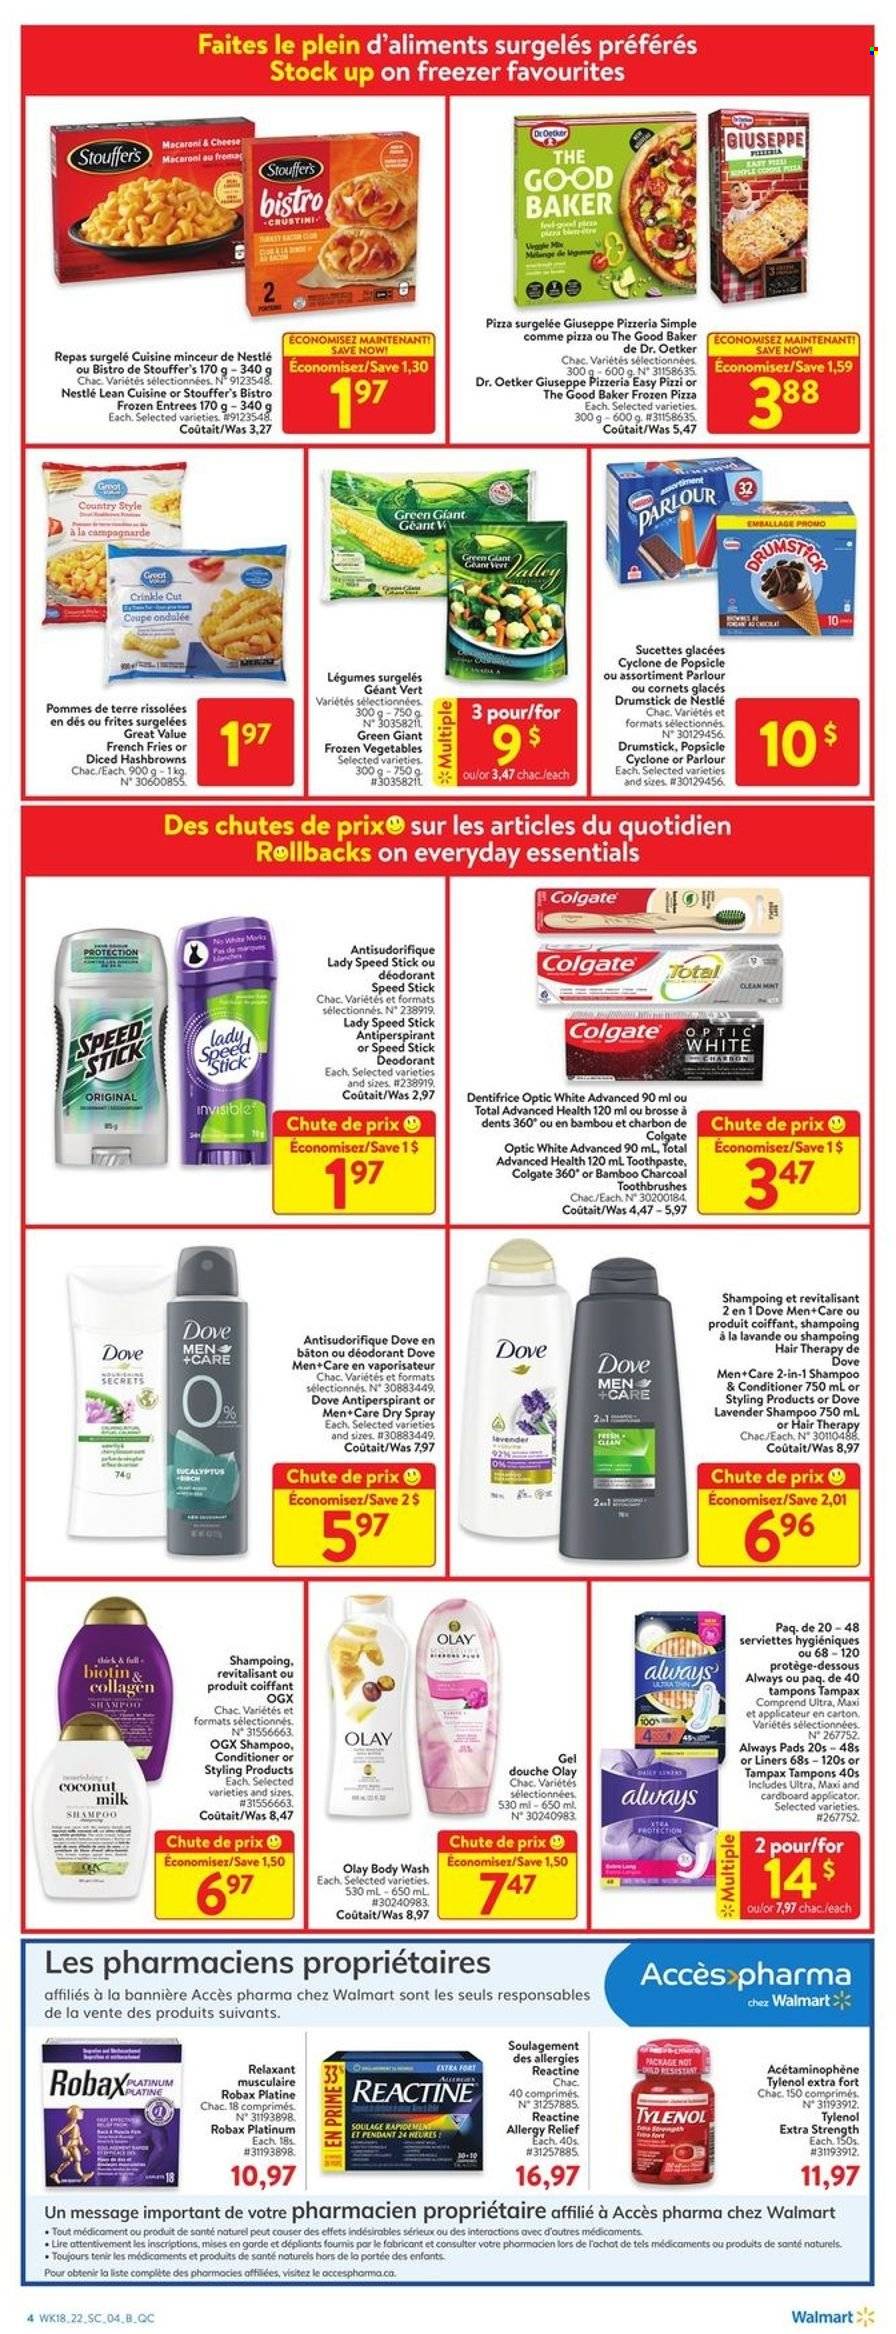 thumbnail - Walmart Flyer - May 26, 2022 - June 01, 2022 - Sales products - macaroni & cheese, pizza, Lean Cuisine, Dr. Oetker, frozen vegetables, Stouffer's, hash browns, potato fries, french fries, coconut milk, body wash, toothpaste, Always pads, tampons, Olay, OGX, conditioner, anti-perspirant, Speed Stick, freezer, pendant, Biotin, Tylenol, allergy relief, Dove, Colgate, Nestlé, shampoo, Tampax, deodorant. Page 5.